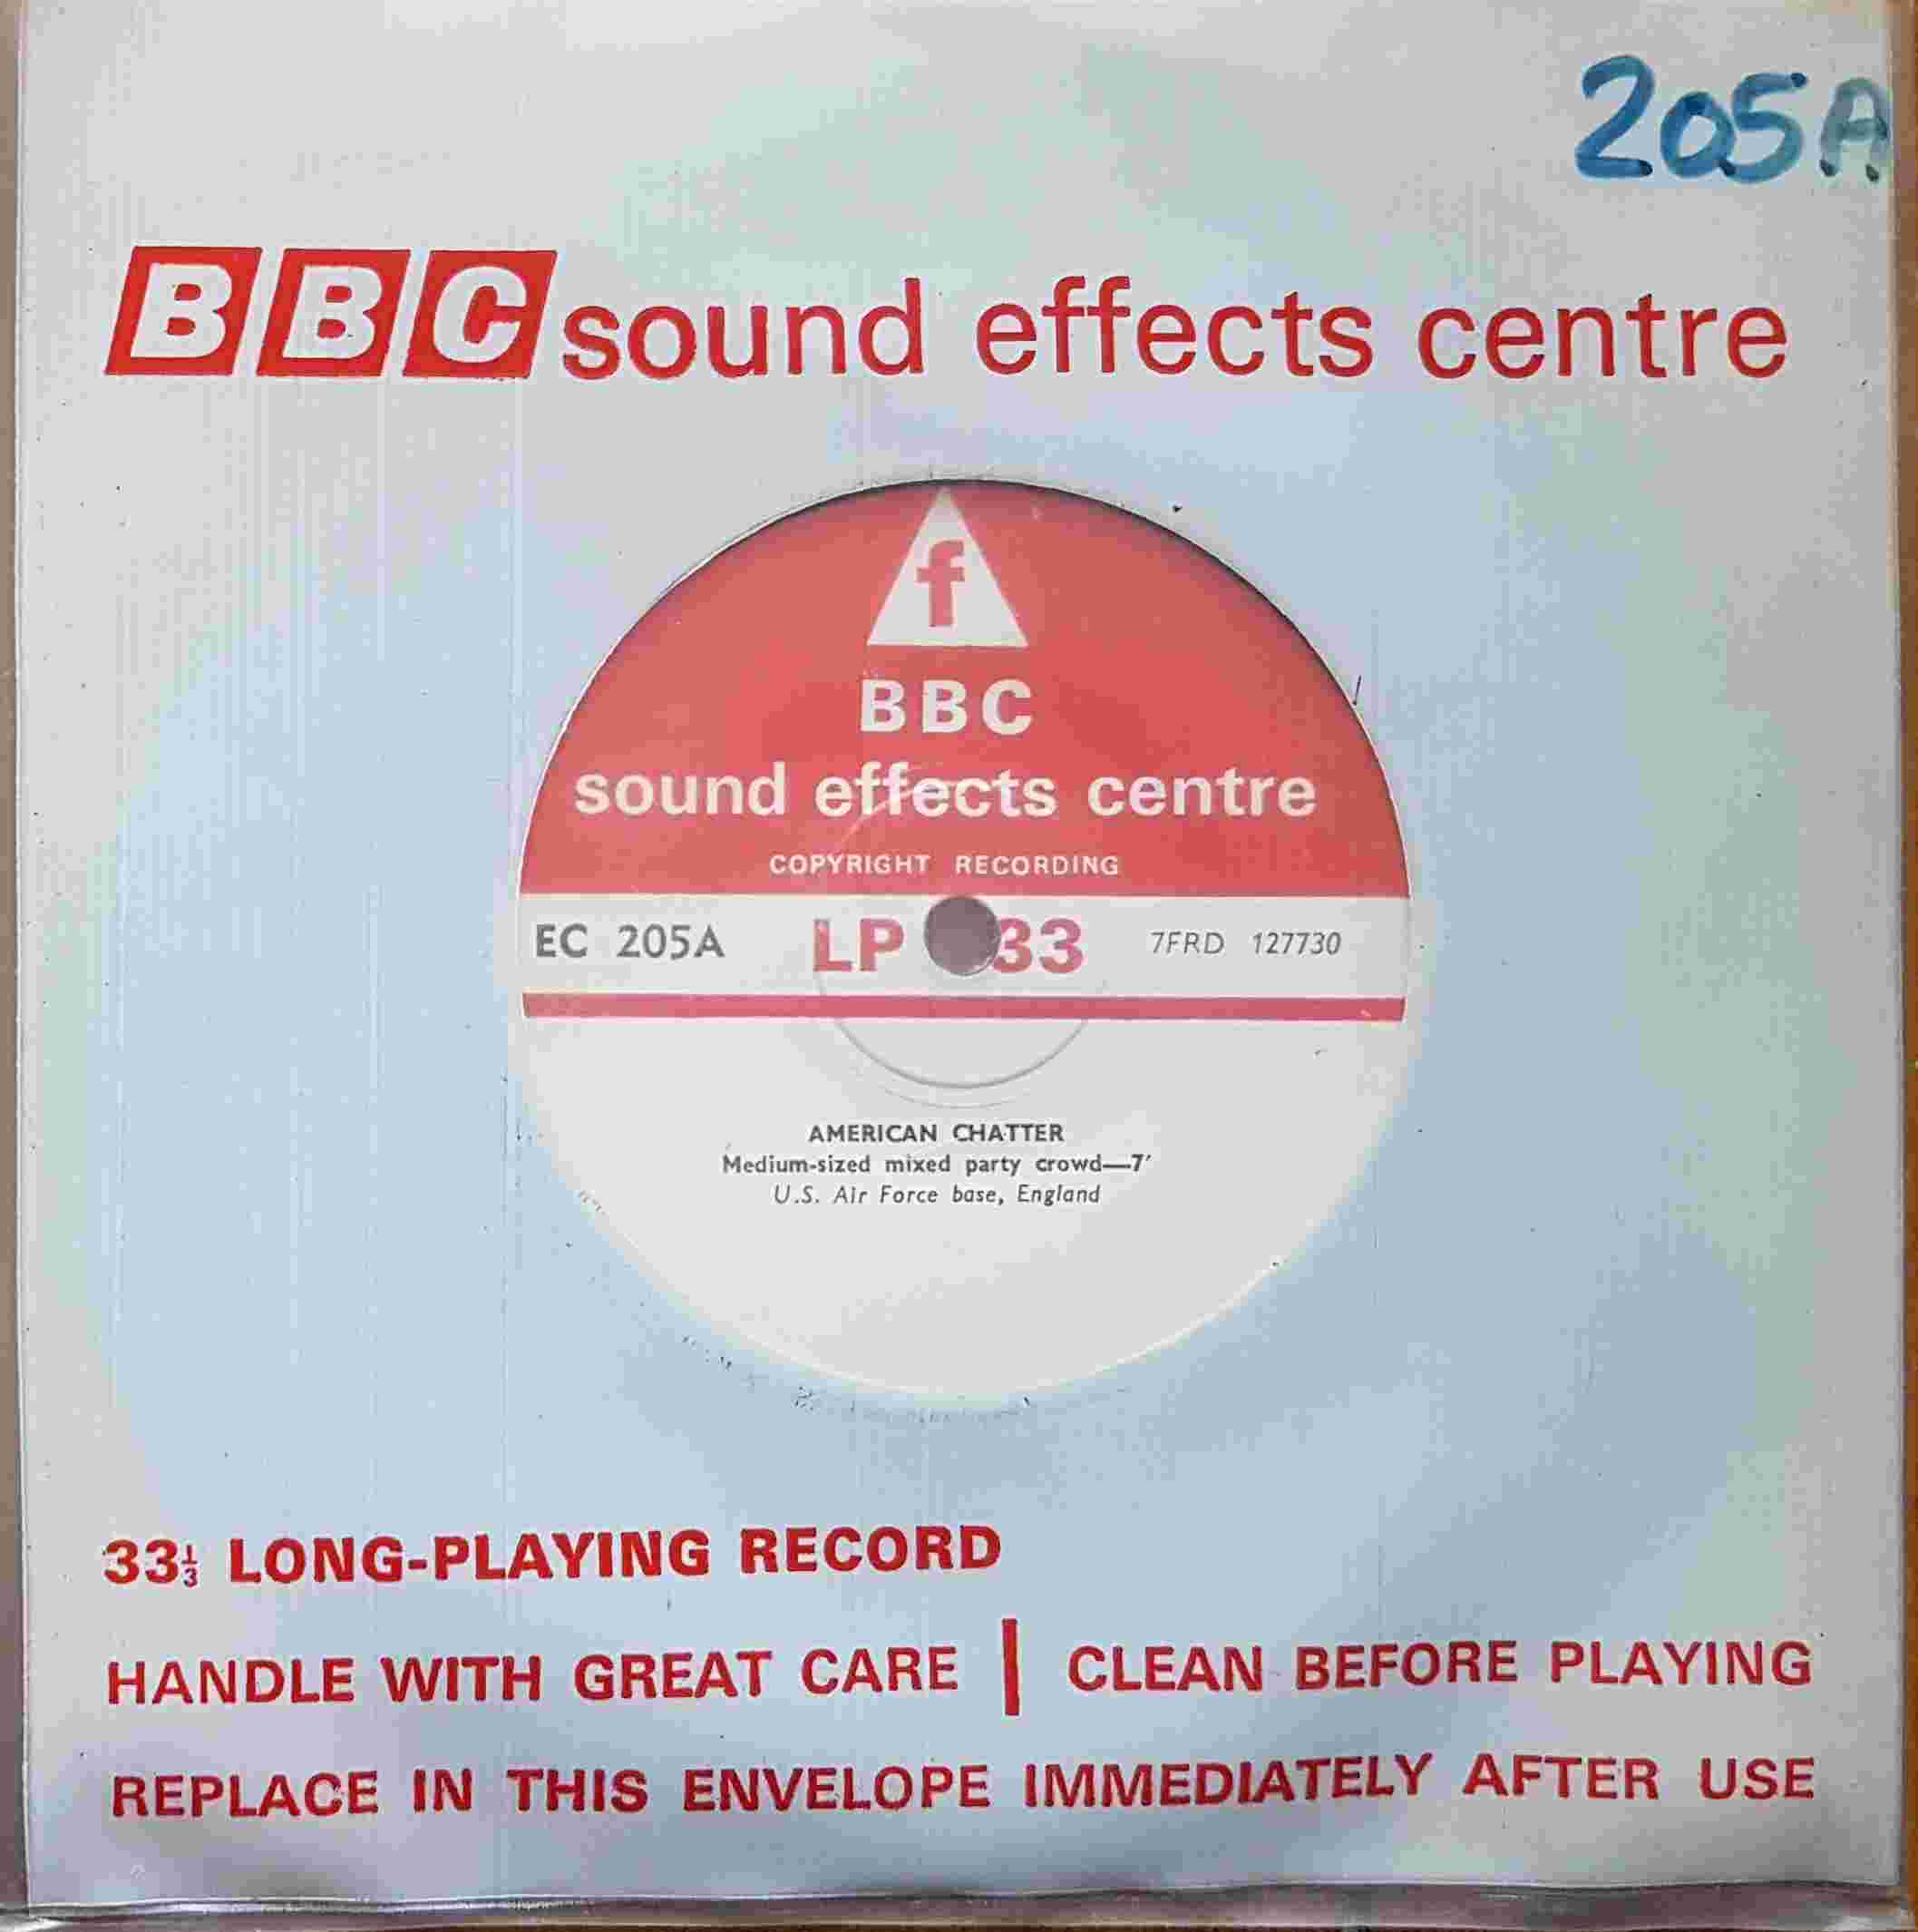 Picture of EC 205A American chatter by artist Not registered from the BBC records and Tapes library